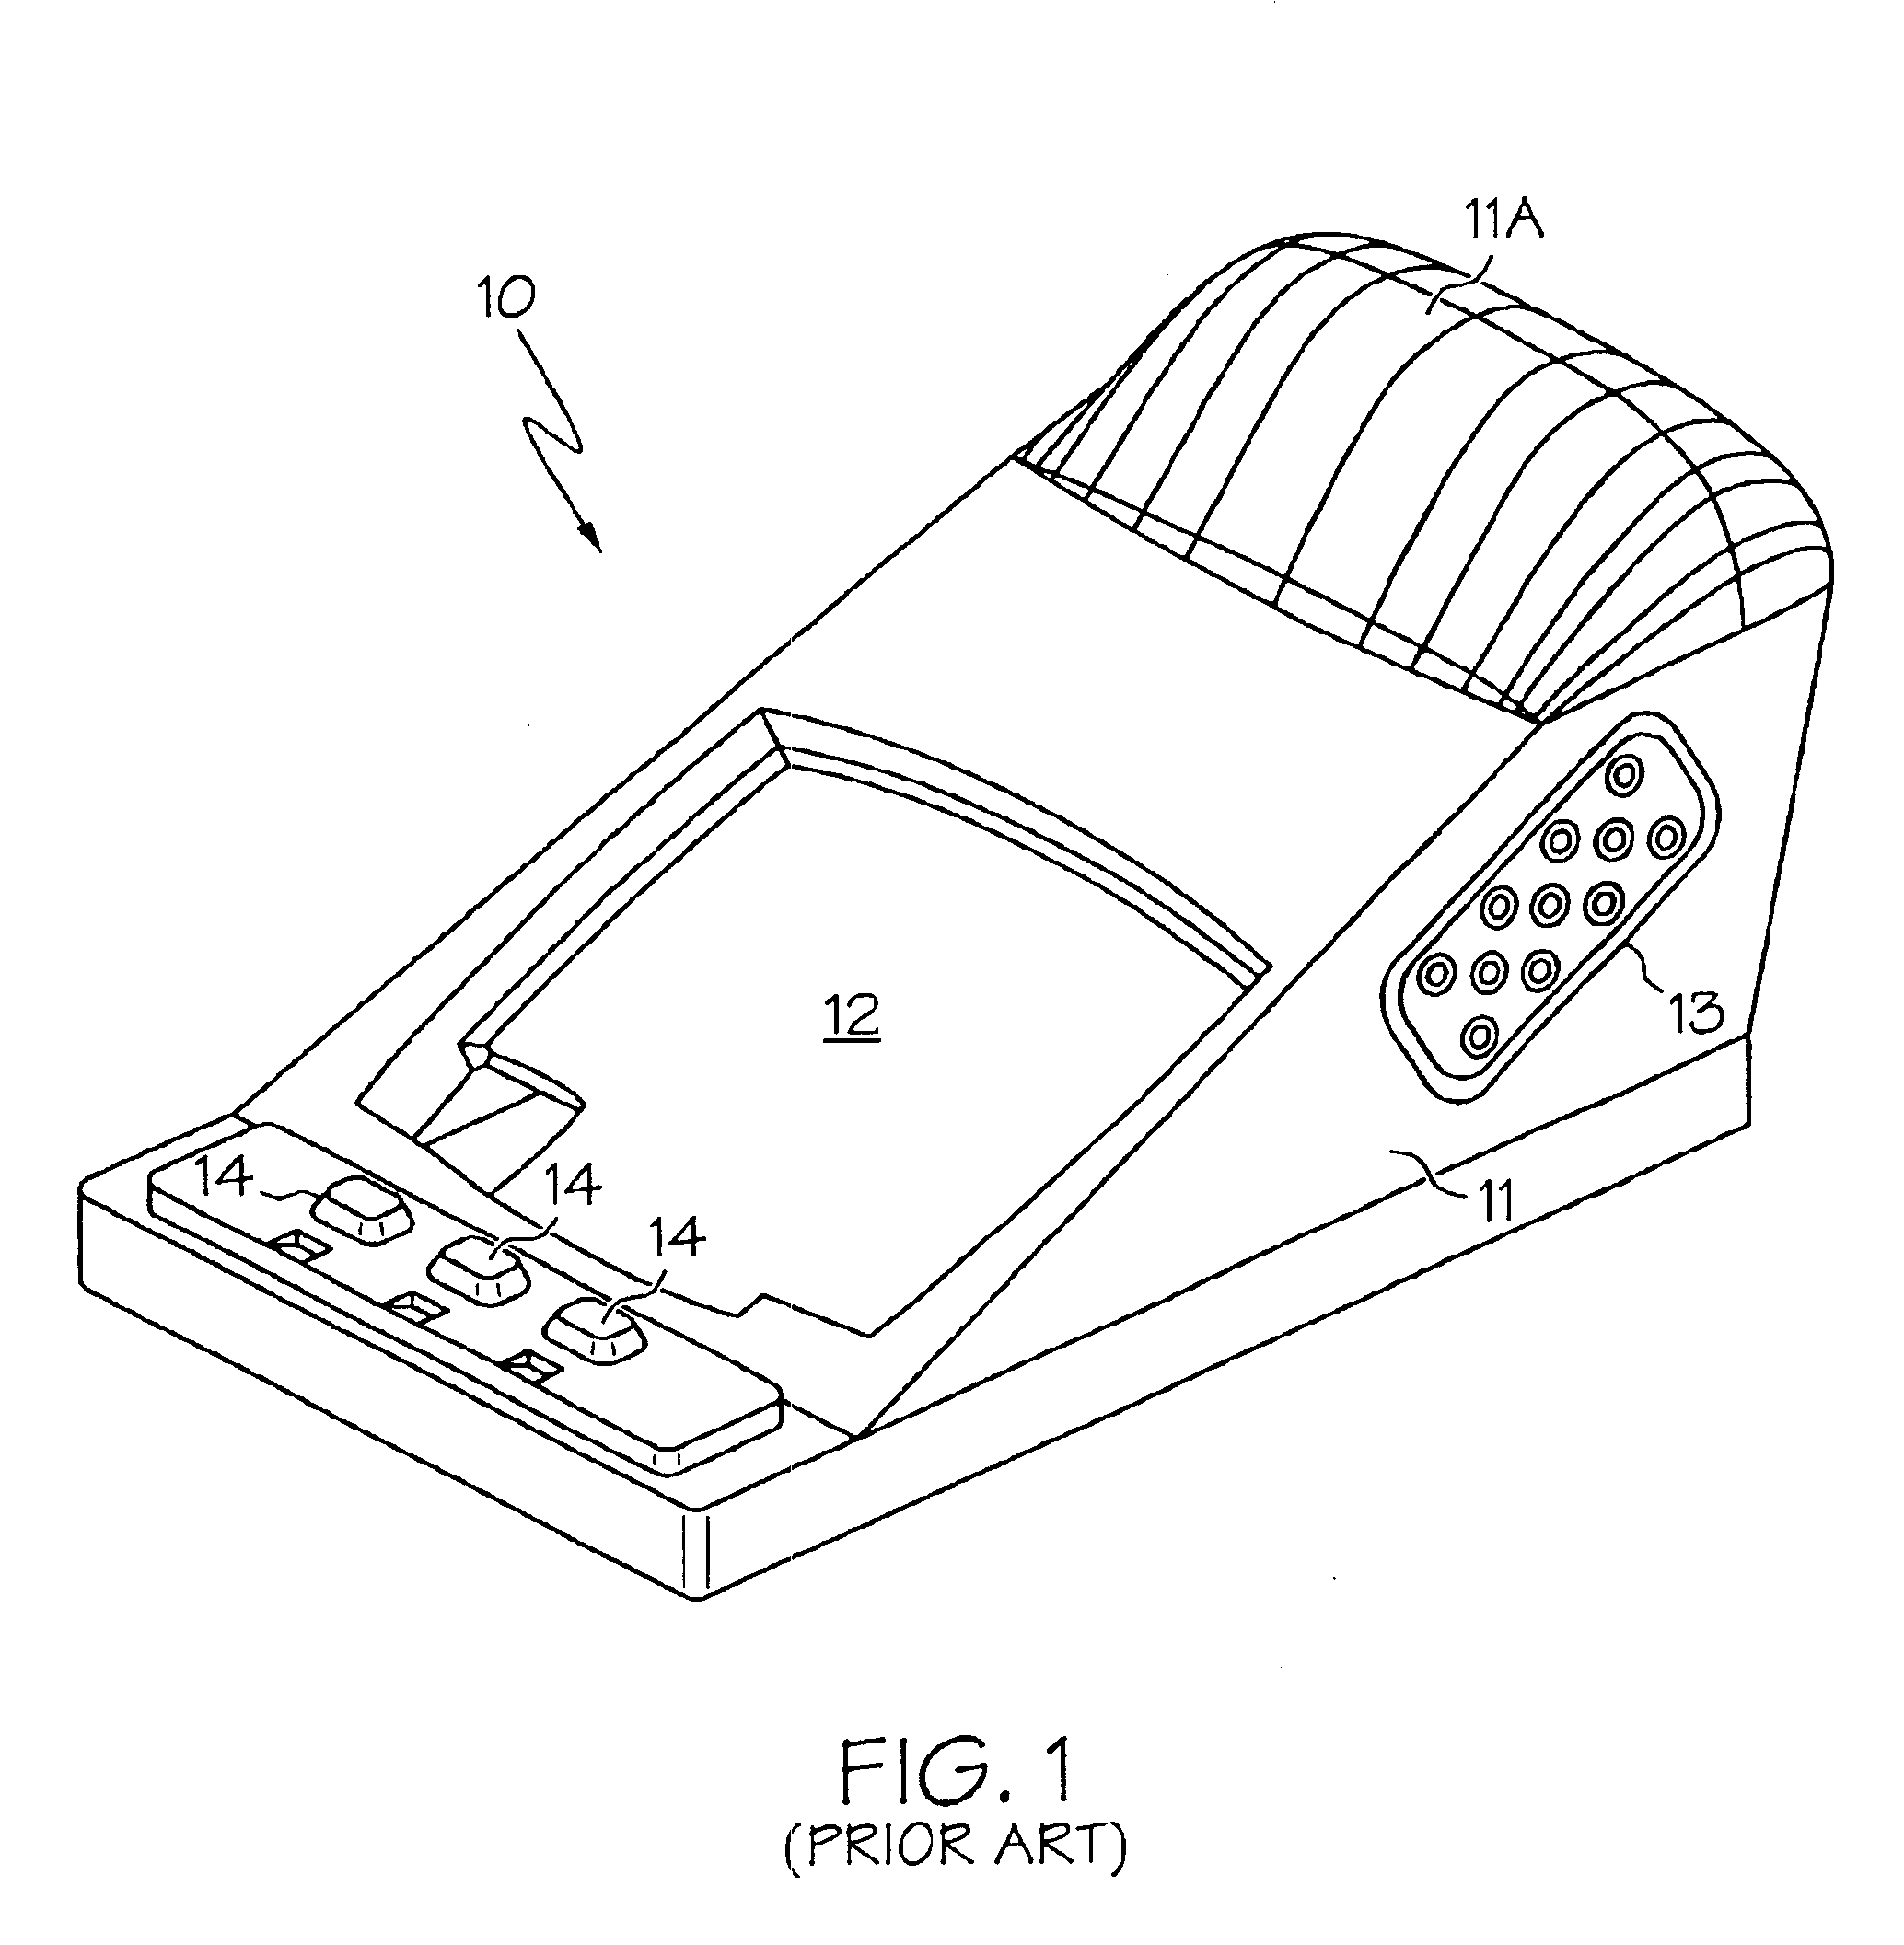 Cursor control console with rotary knob and method of use